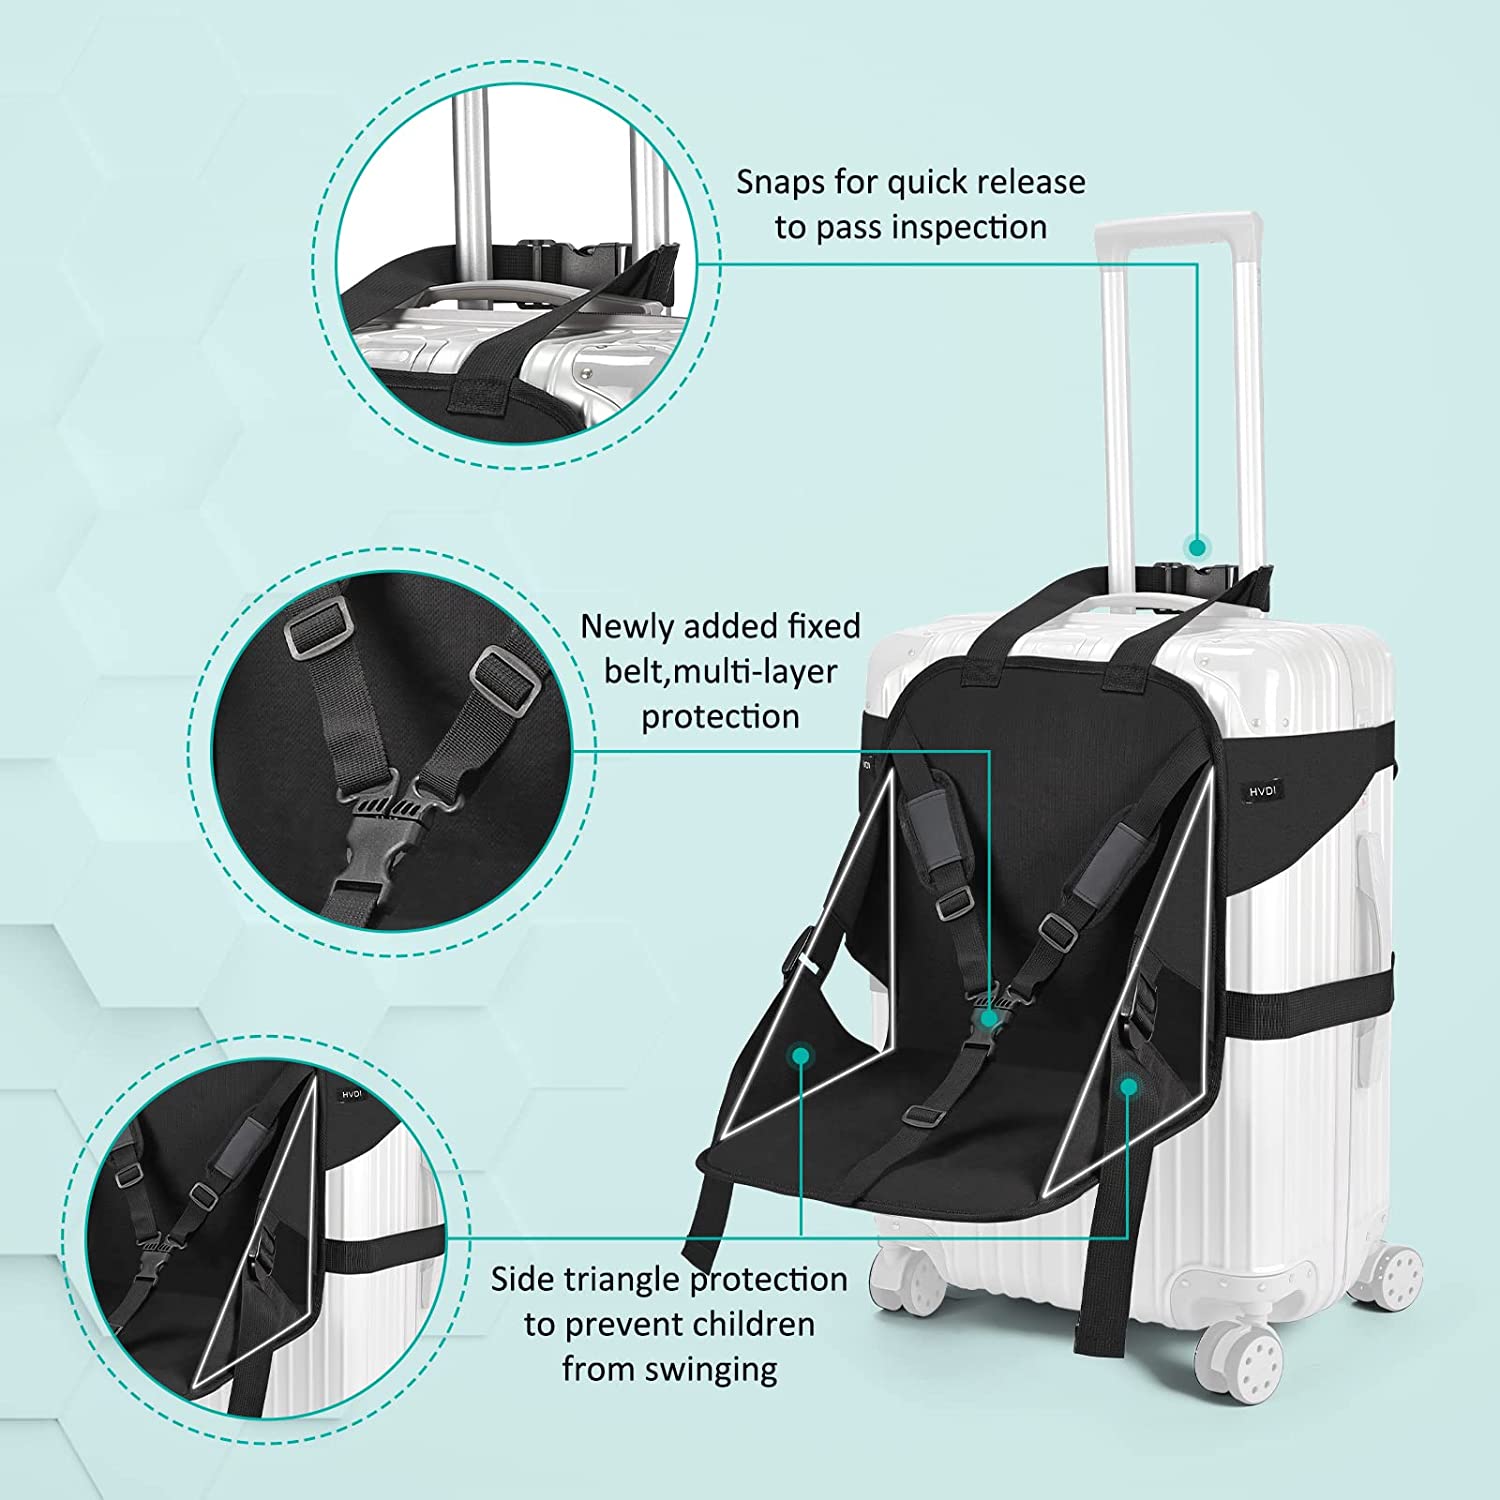 Upgraded Kids Ride on Suitcase Seat for Toddler,Carry On Luggage with Seat for Kids,Portable Travel Seat with Seat Belt, Free Hands for Airport